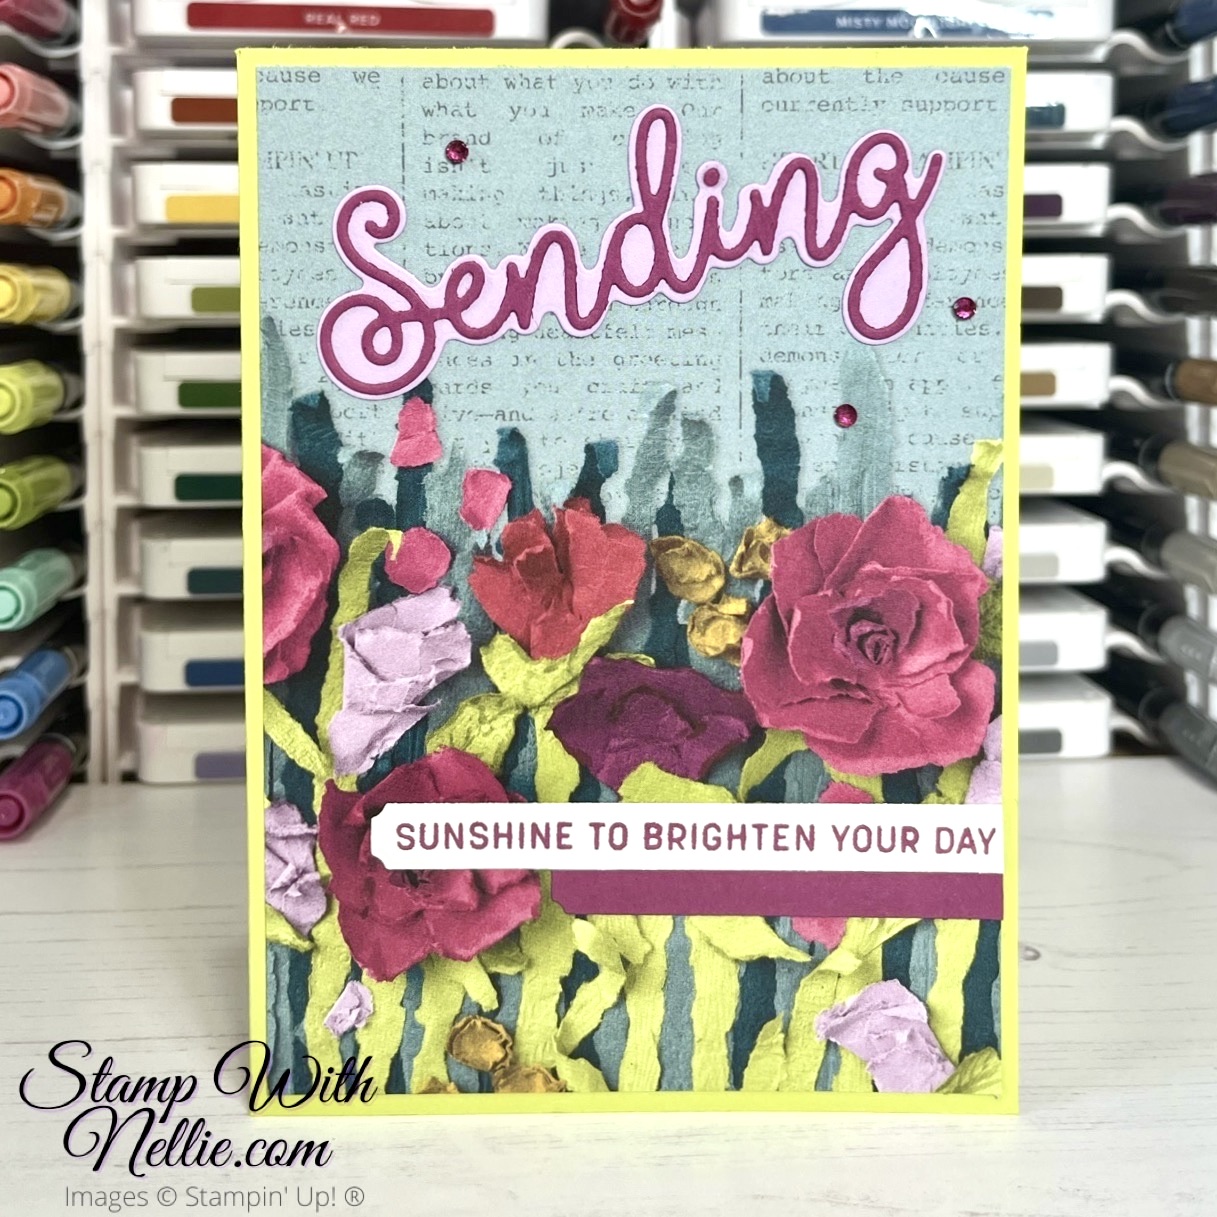 Brightly coloured card that says sending sunshine to brighten your day